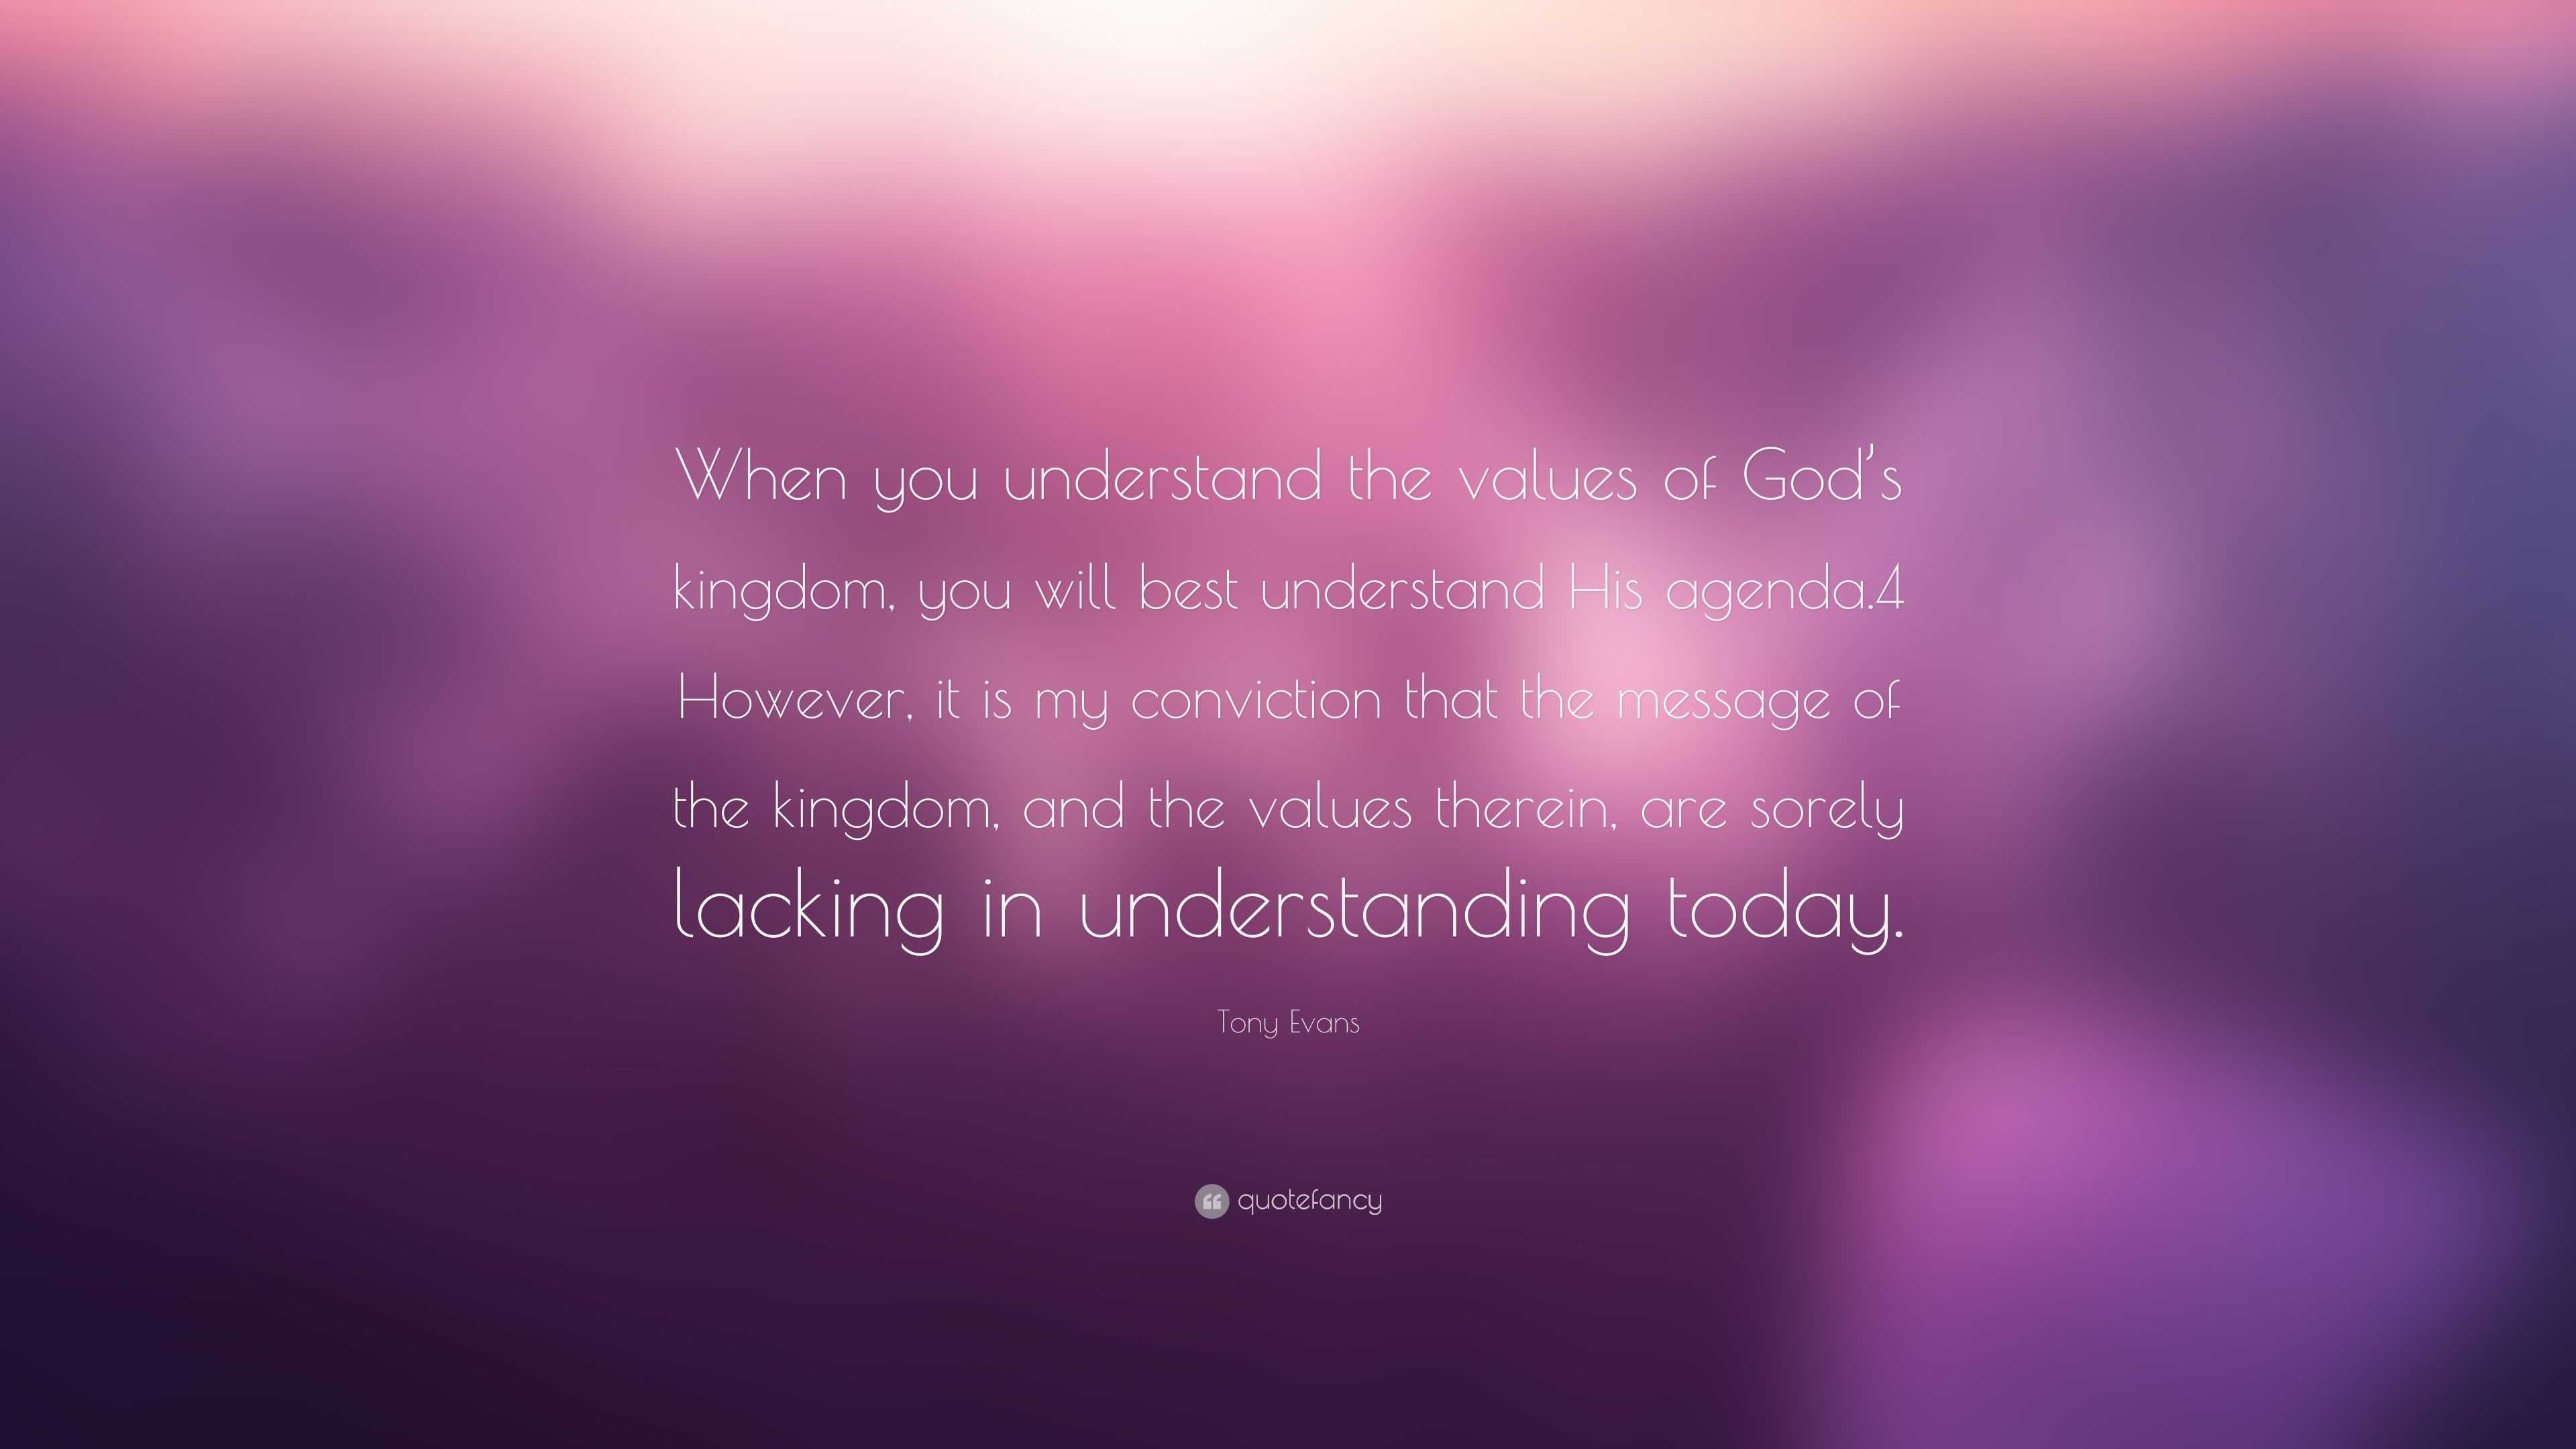 Tony Evans Quote: “When you understand the values of God’s kingdom, you ...